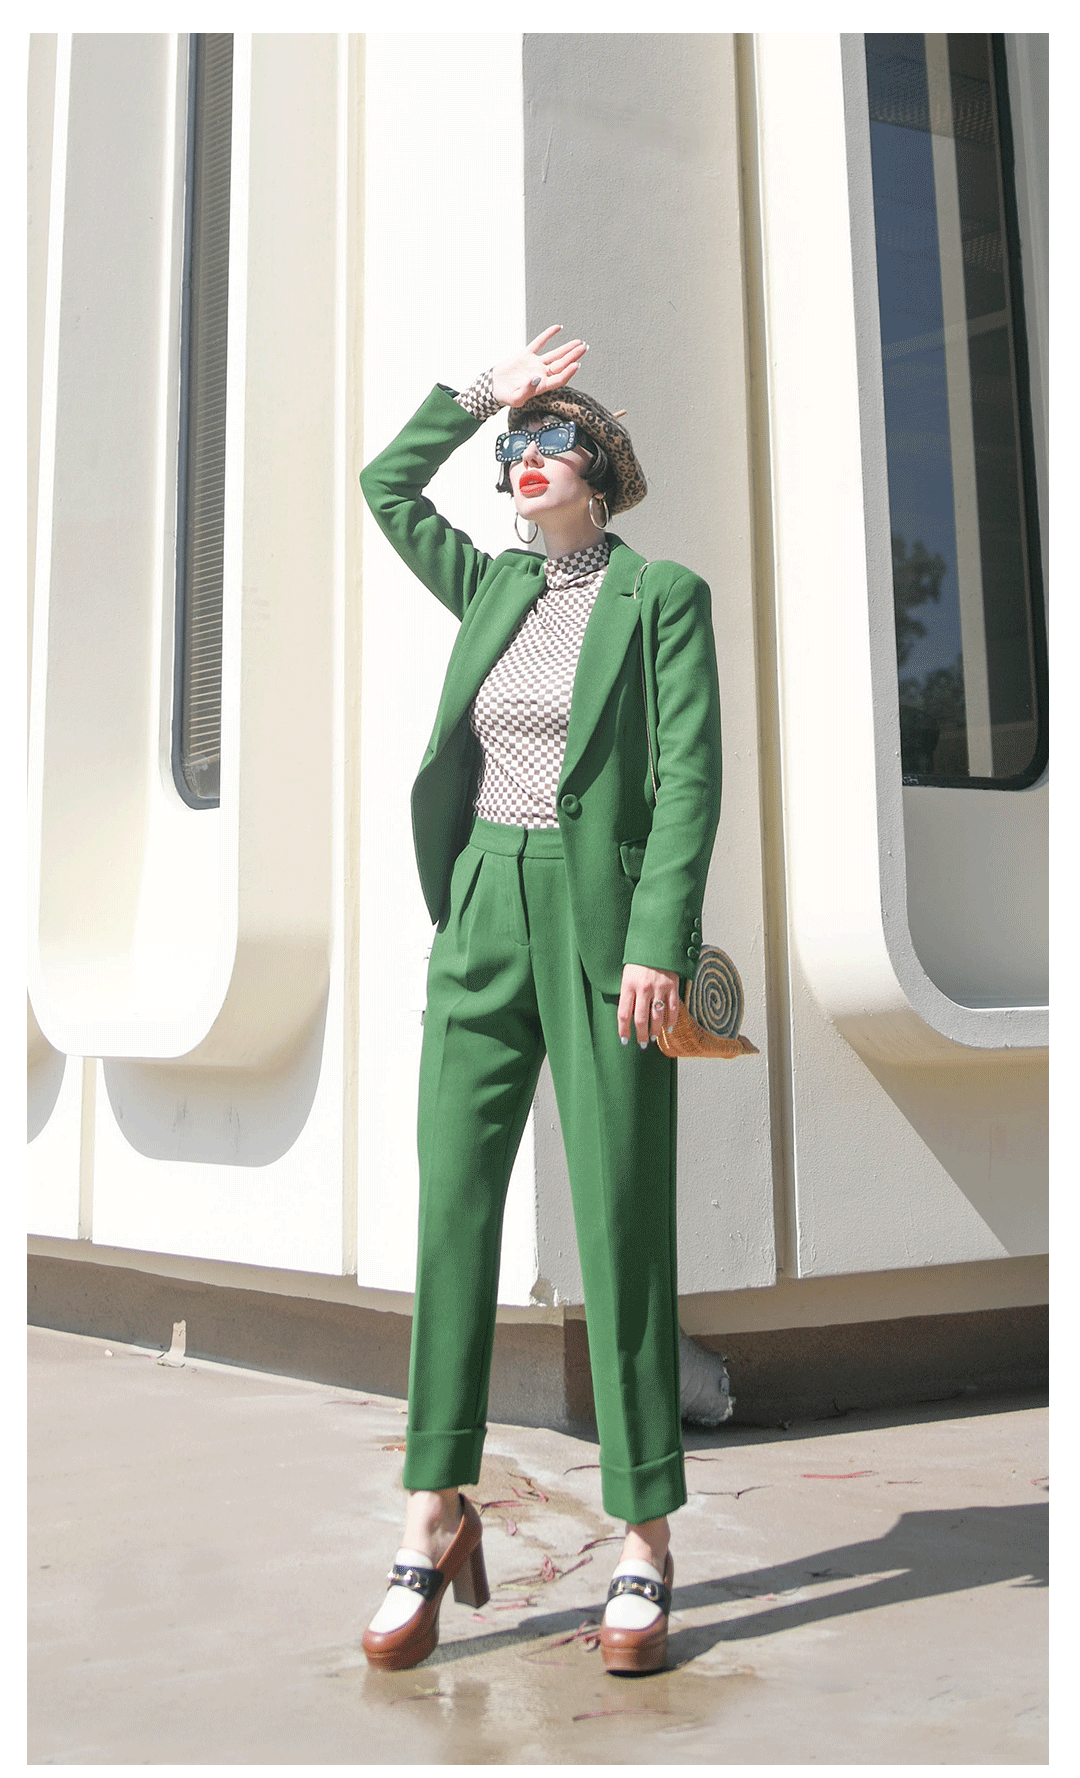 Suited for Color: @afashionnerd styles our new green suit